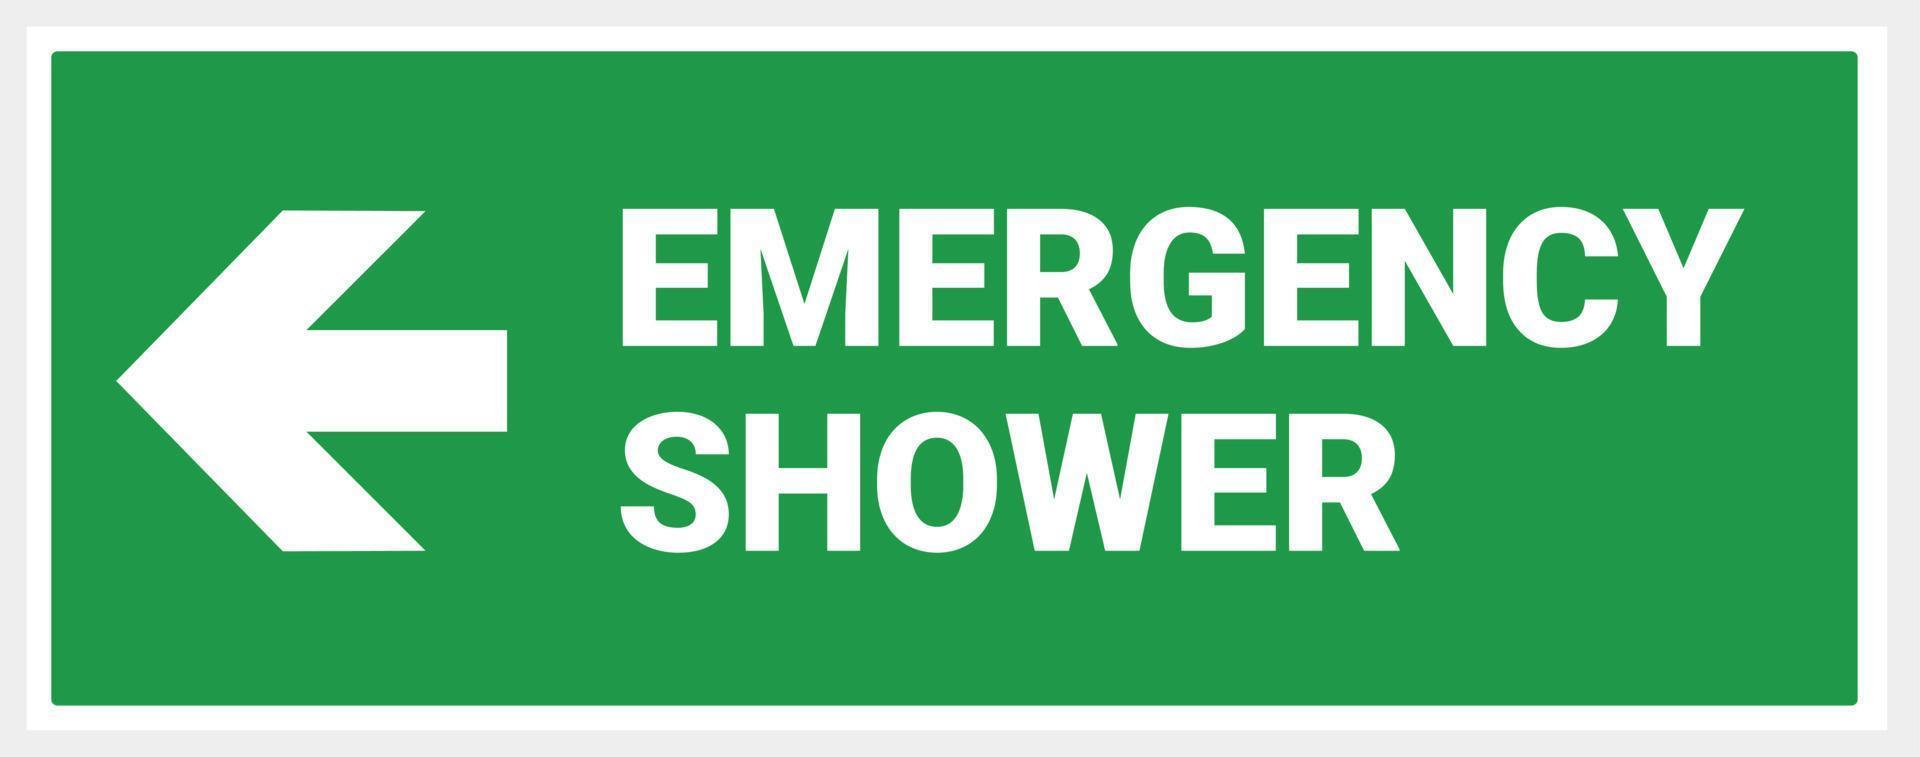 Arrow to emergency shower. green background vector